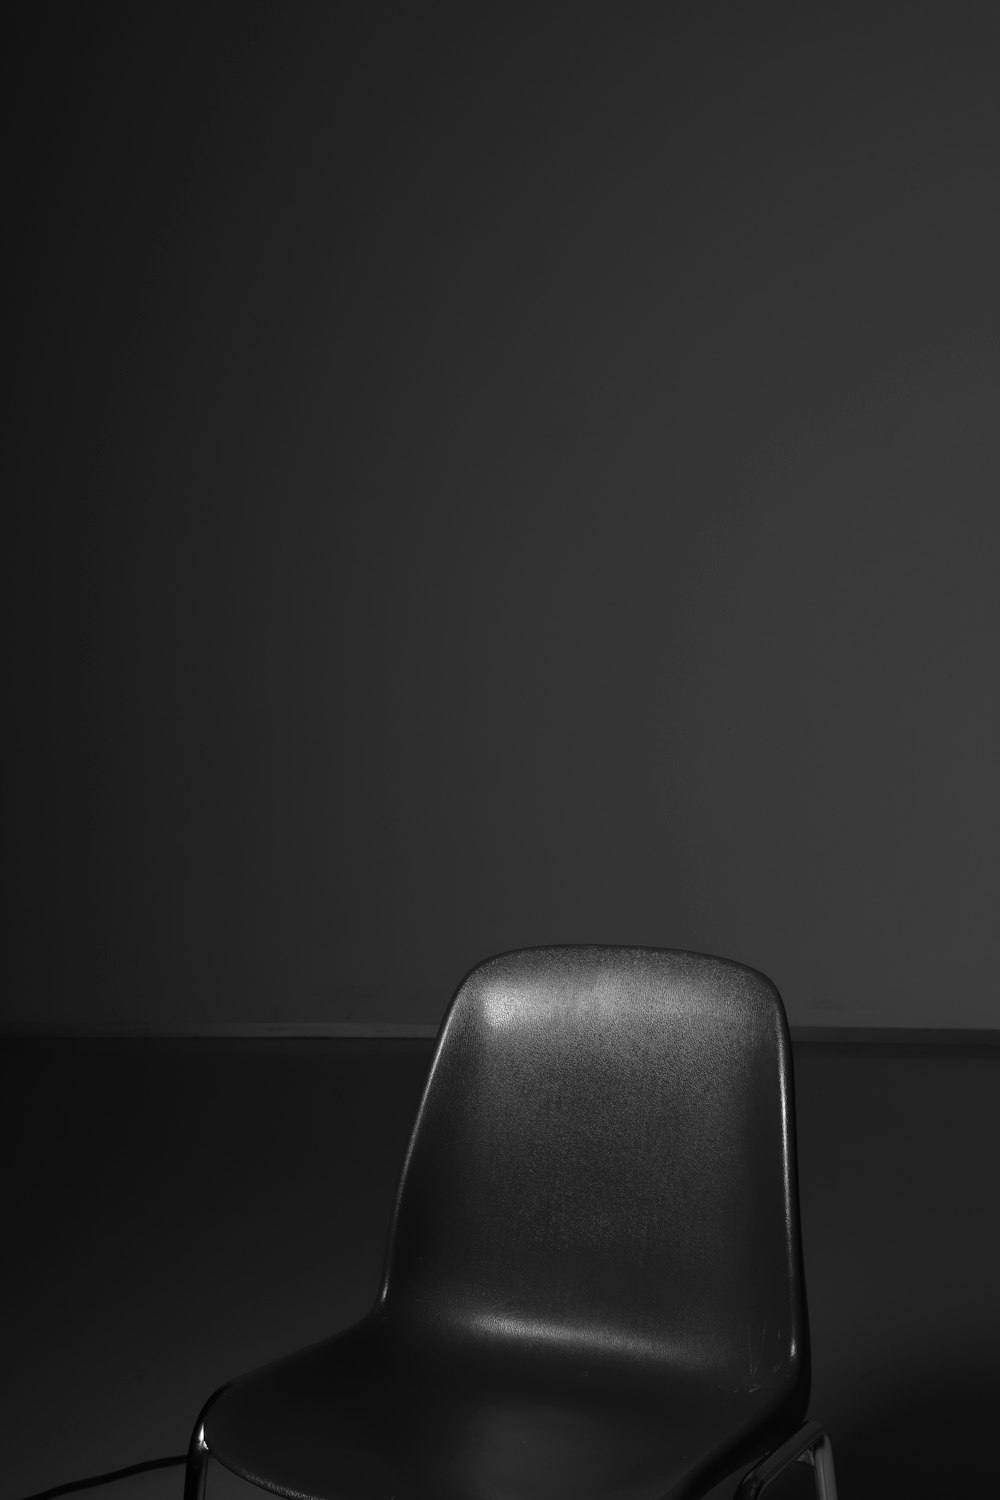 black leather chair on black surface